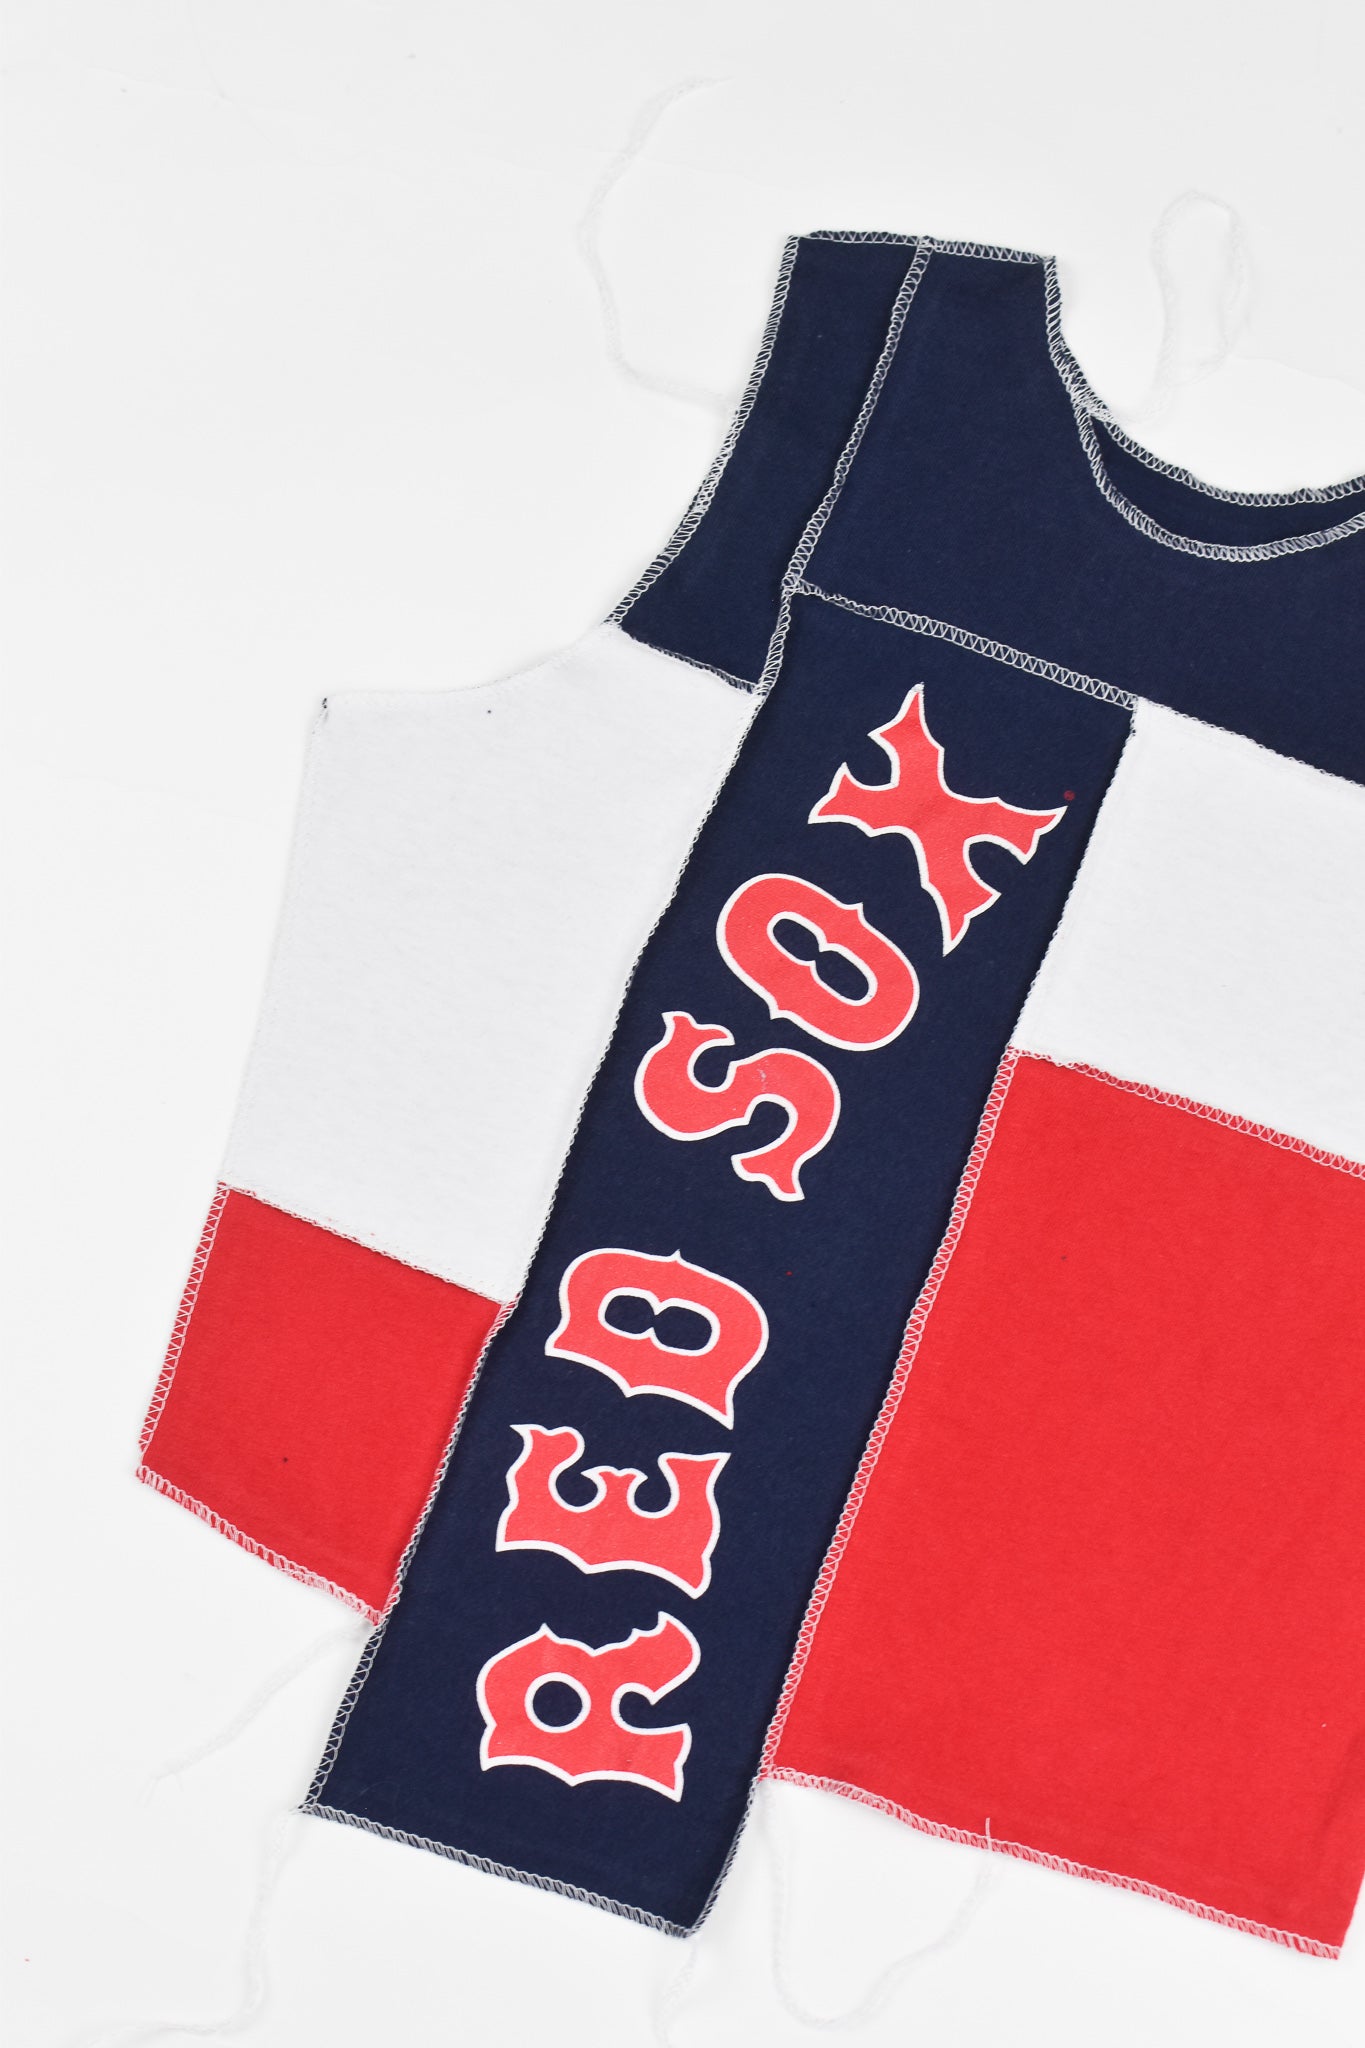 Upcycled Red Sox Scrappy Tank Top